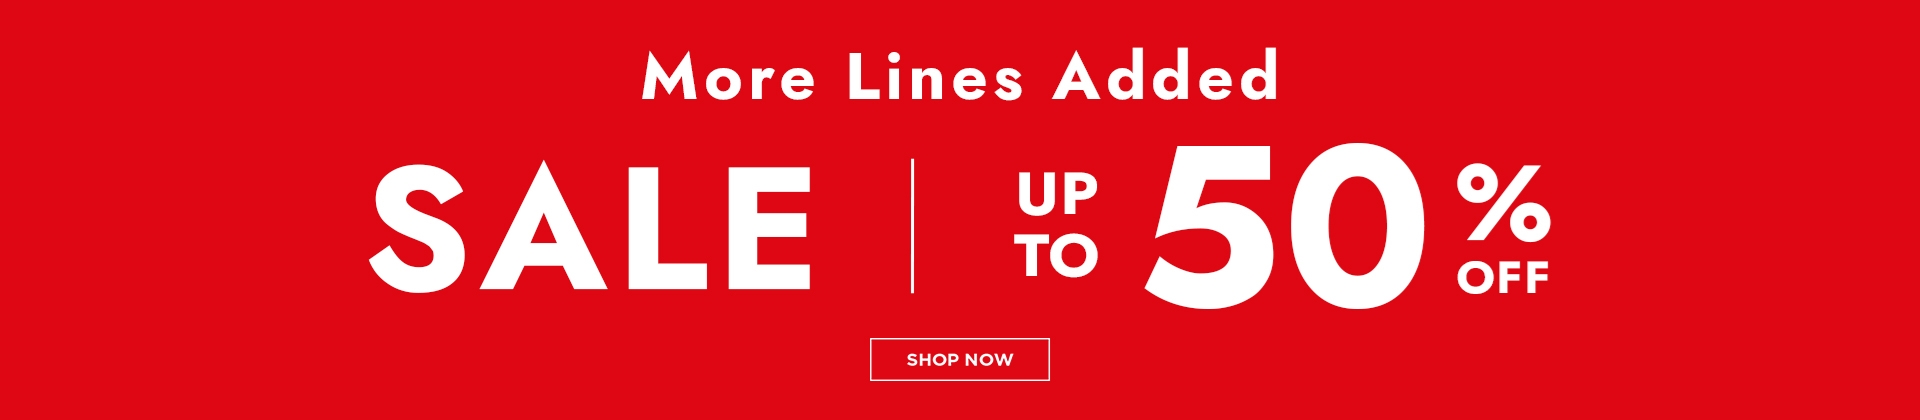 SALE UP TO 50% OFF - NEW LINES ADDED 